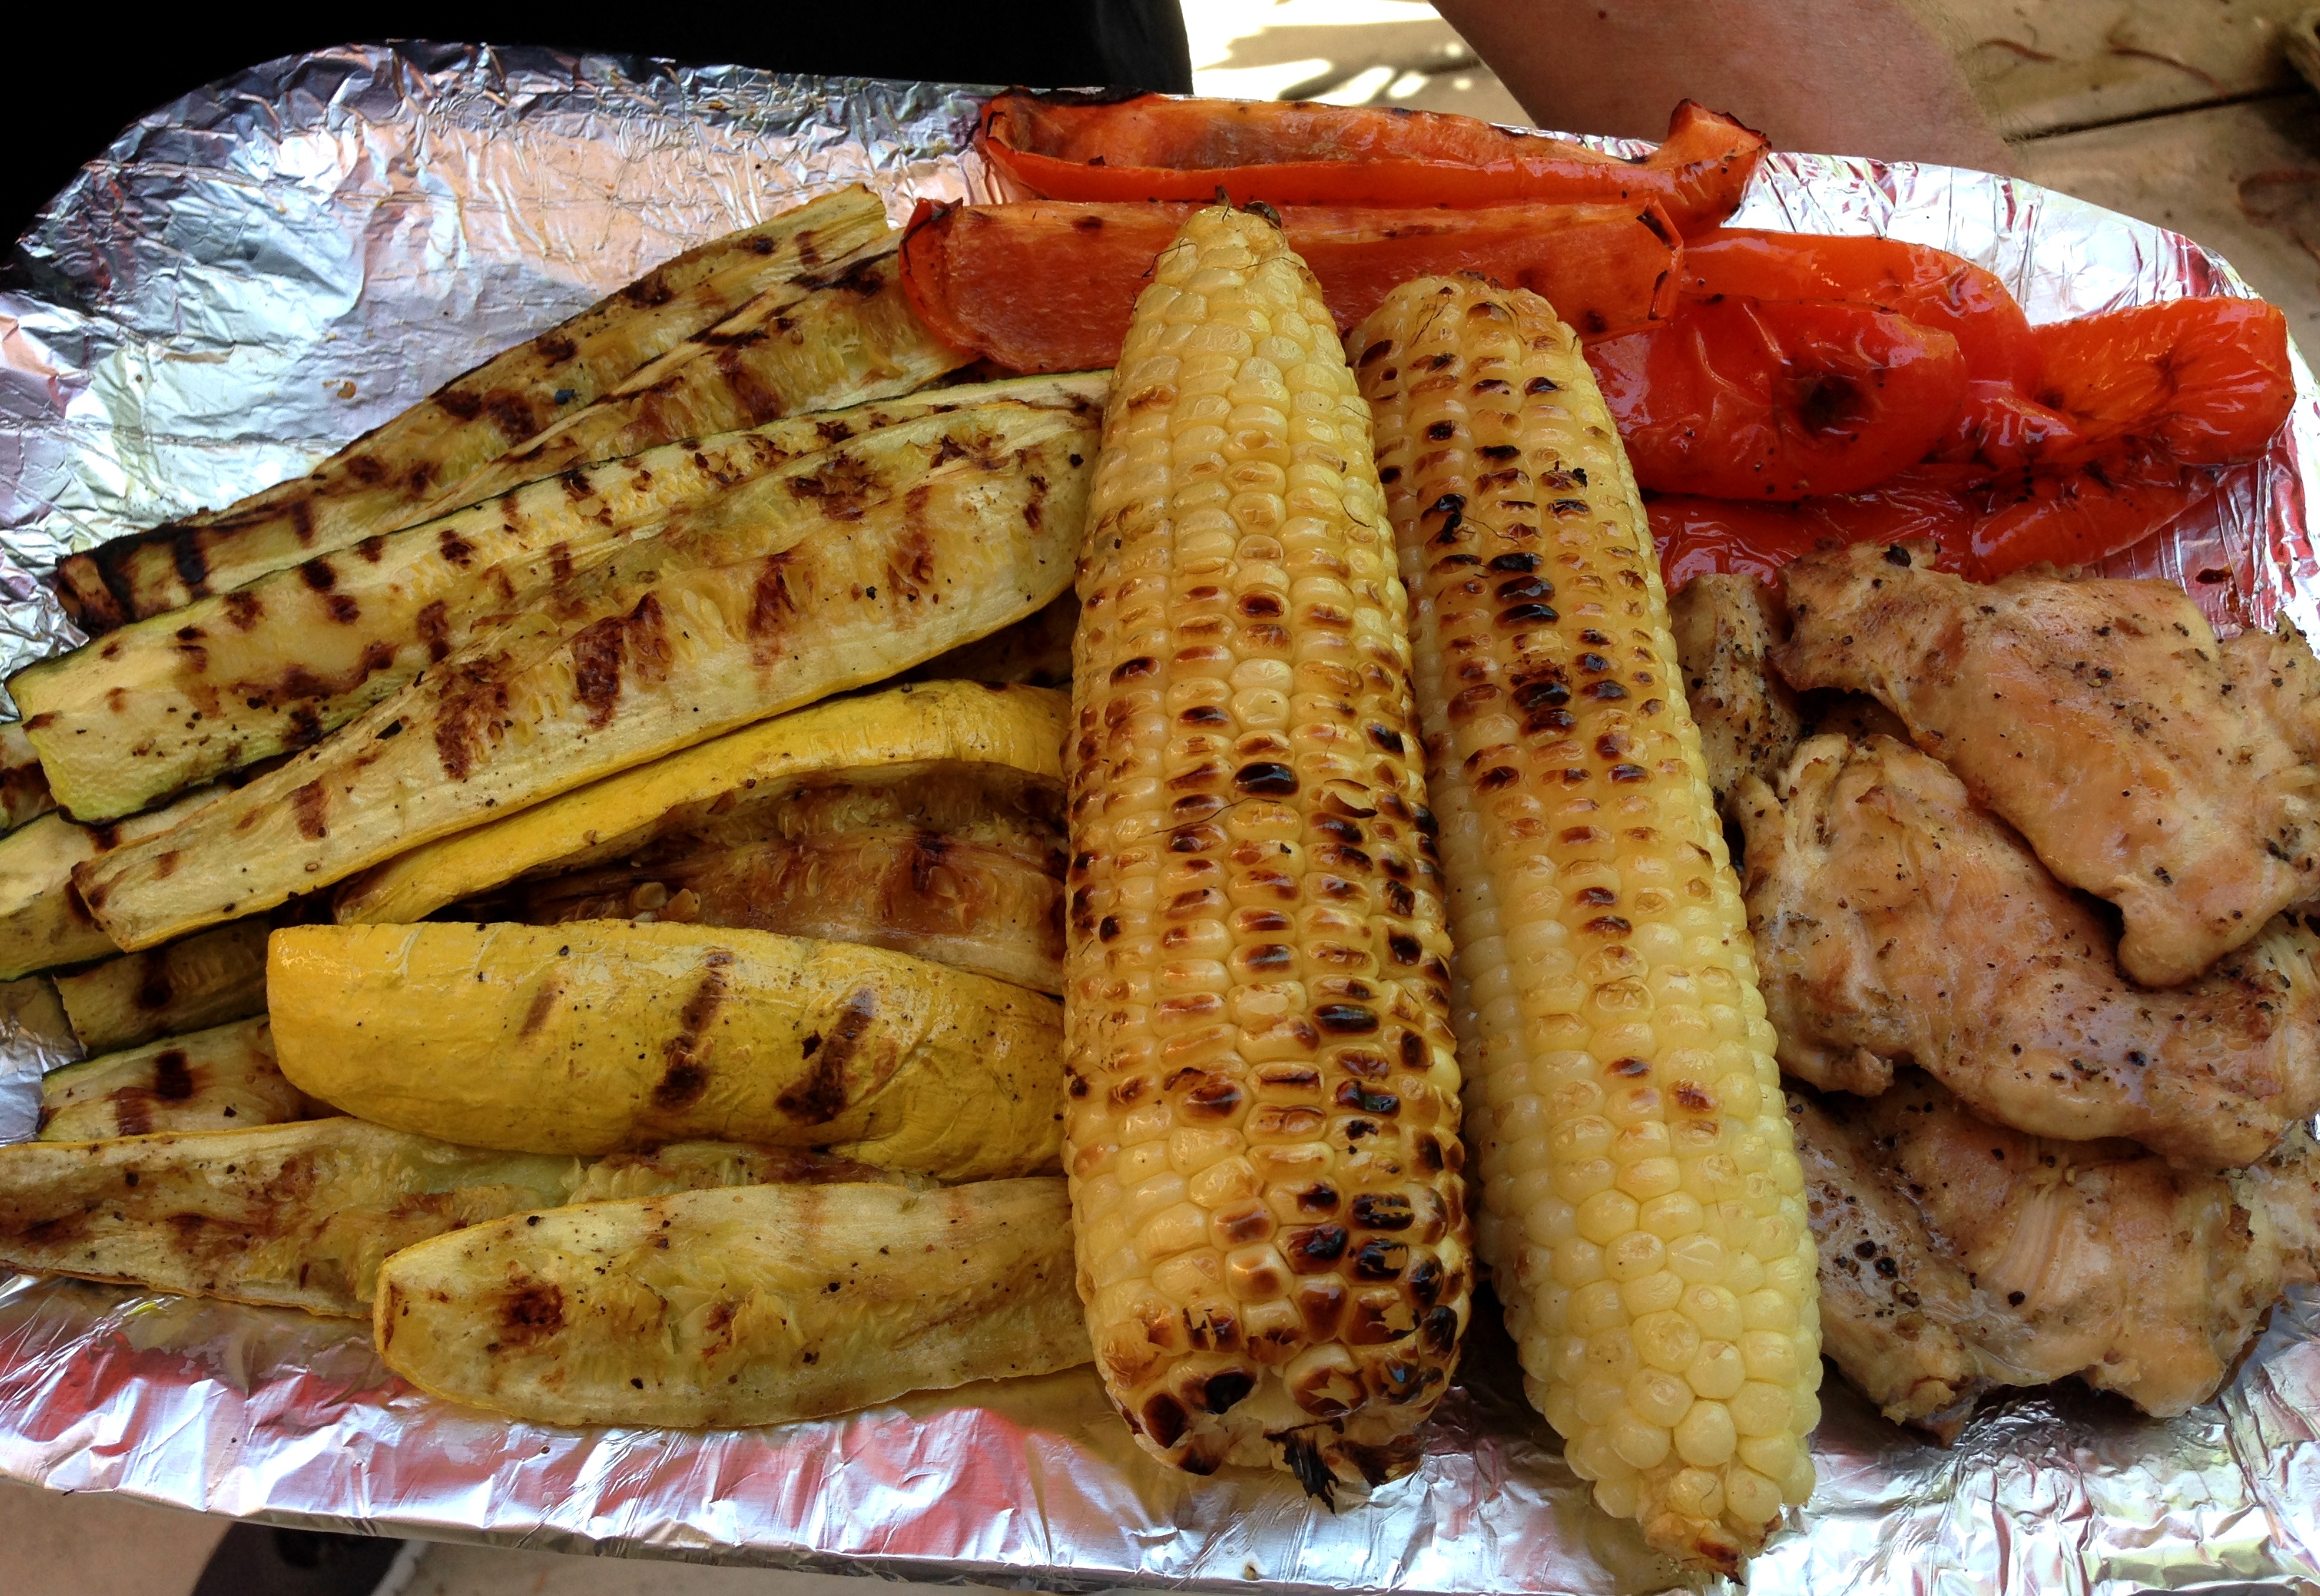 Grilled veggies and chicken